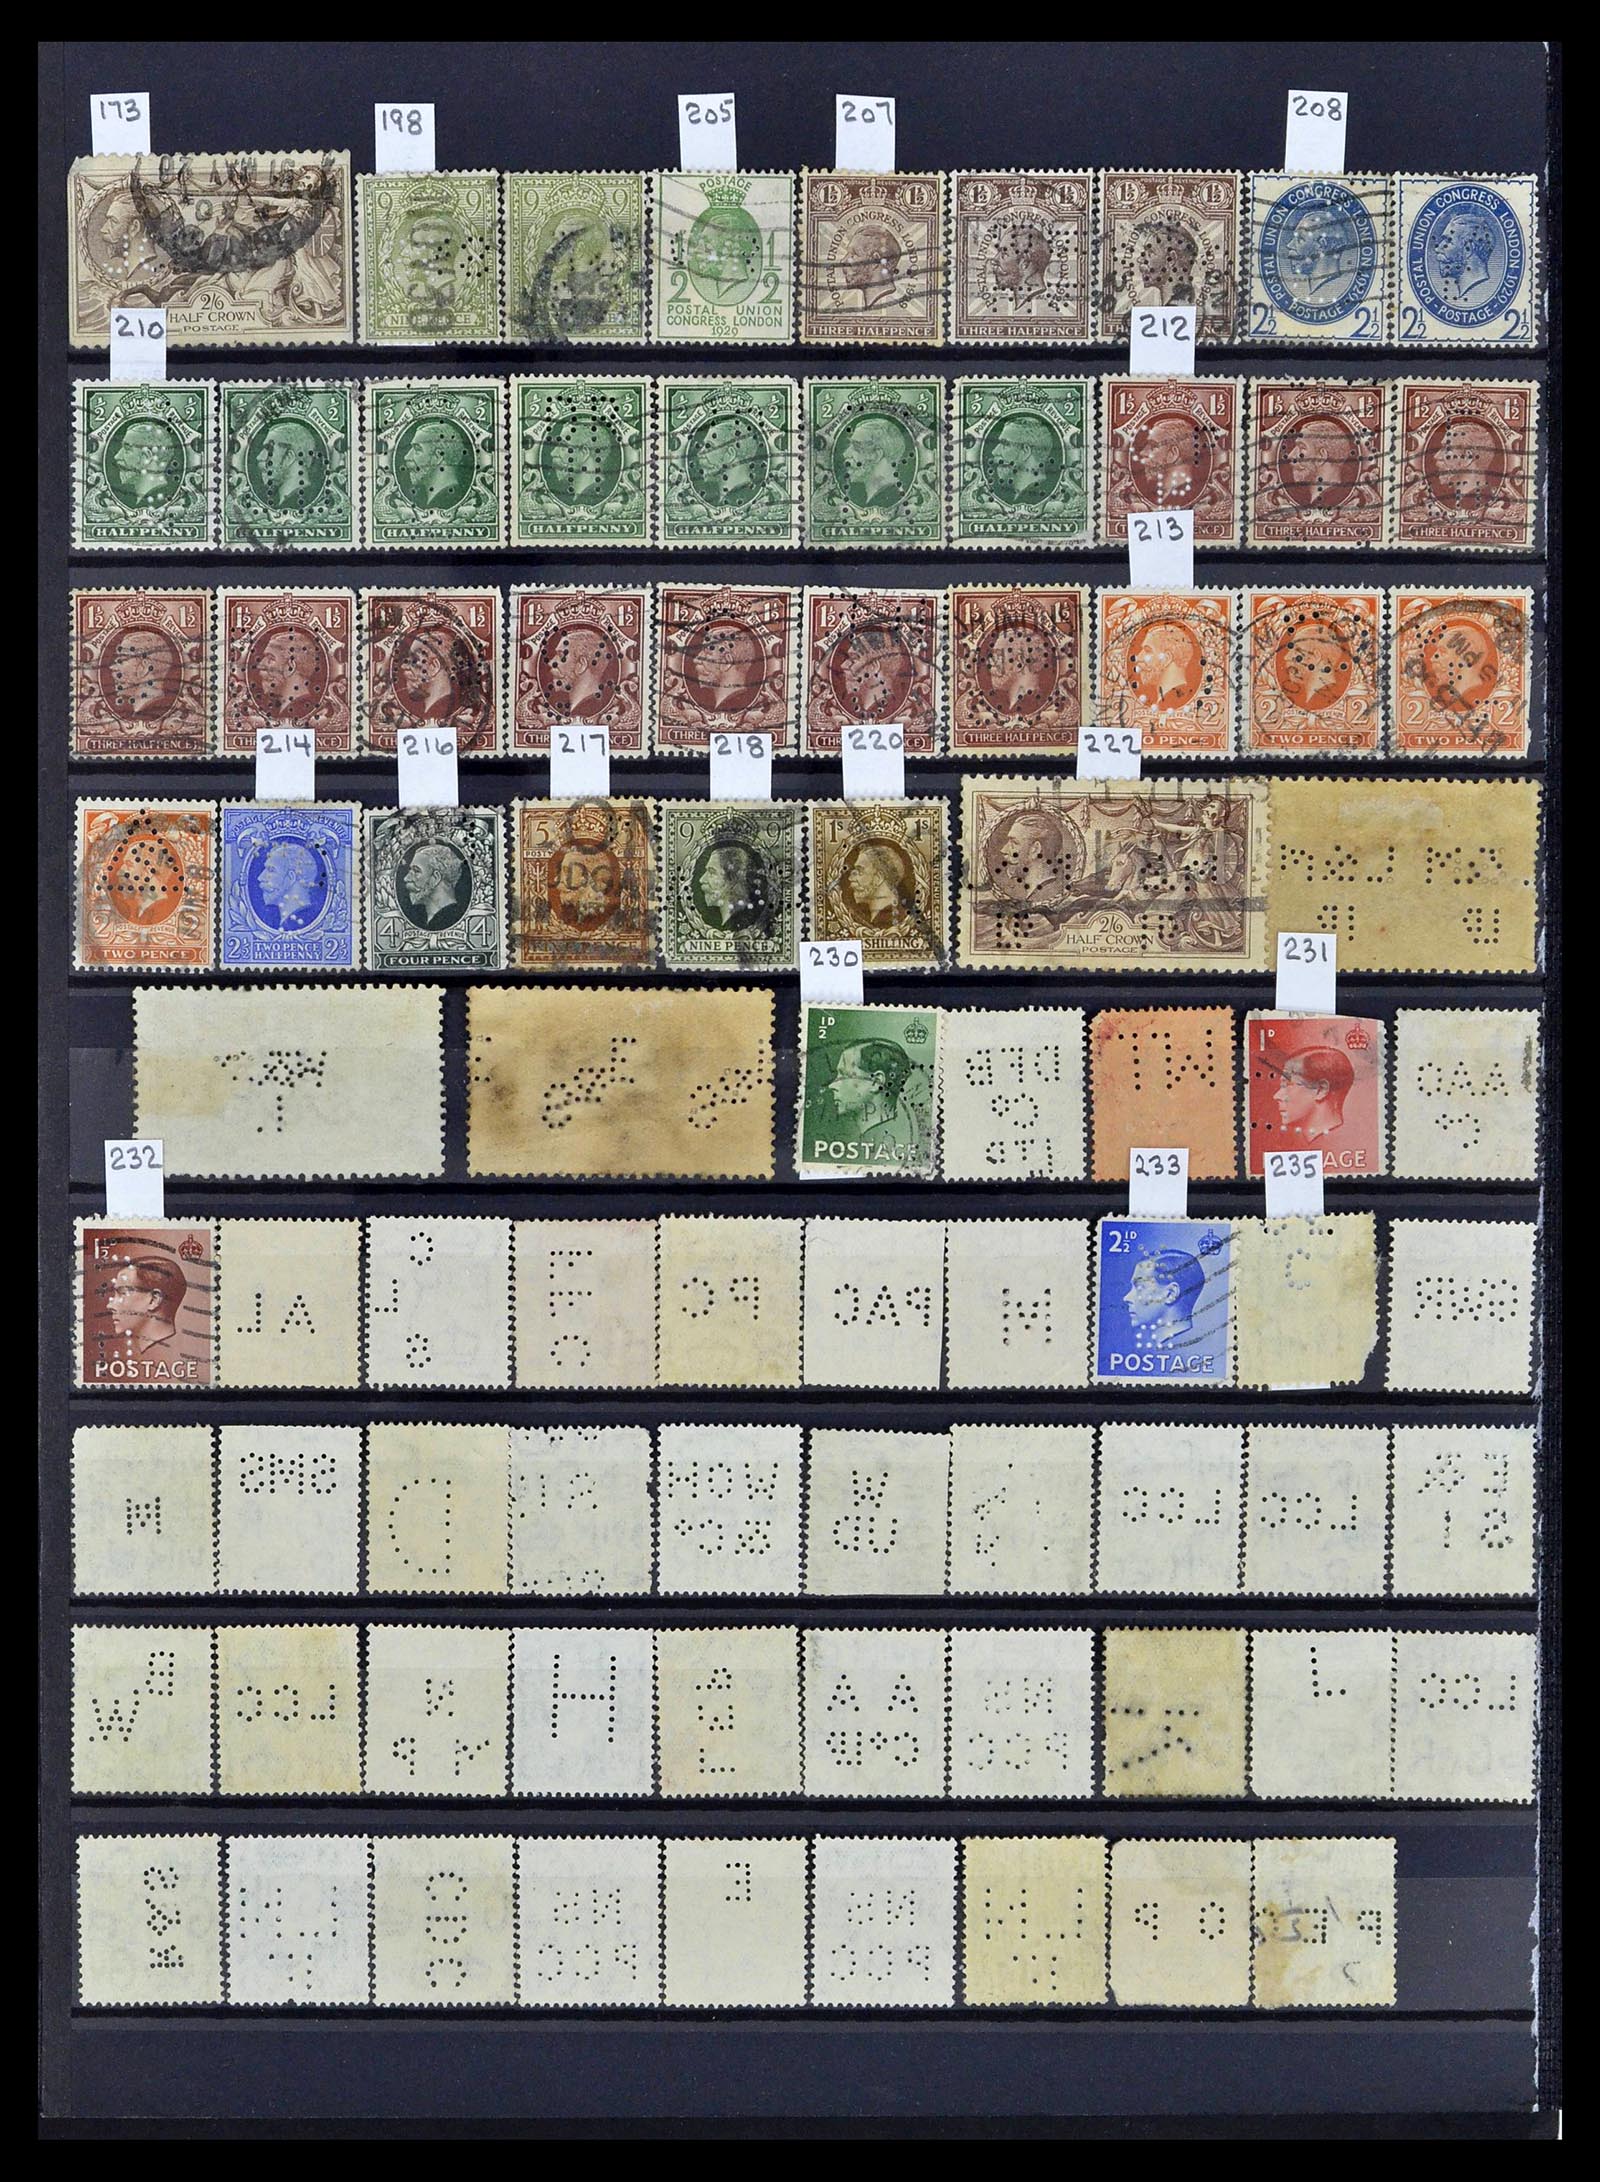 39196 0113 - Stamp collection 39196 Great Britain 1844-1955.